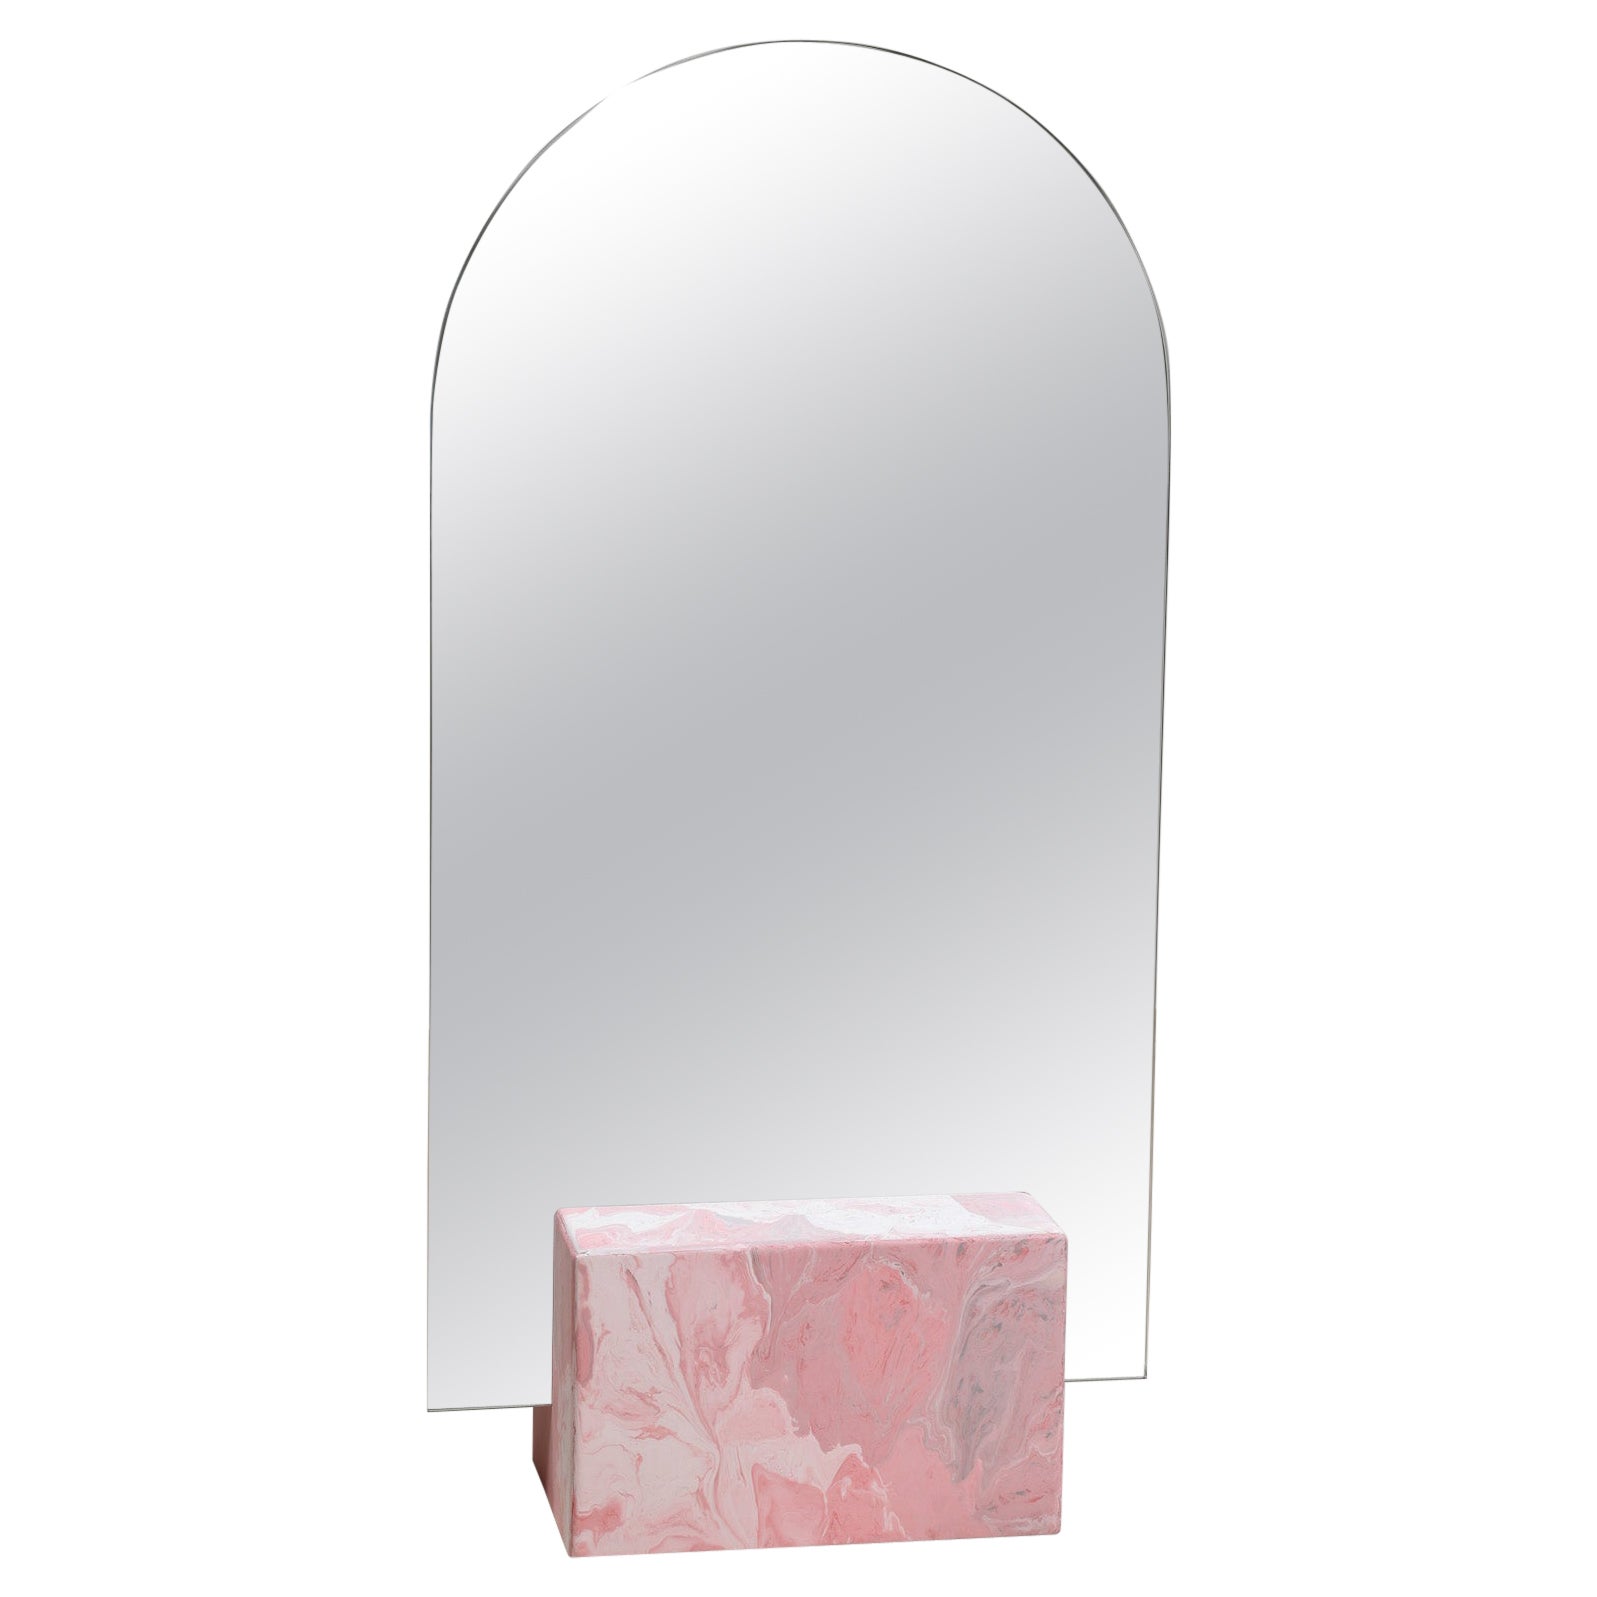 Pink Console Mirror Hand-Crafted from 100% Recycled Plastic by Anqa Studios